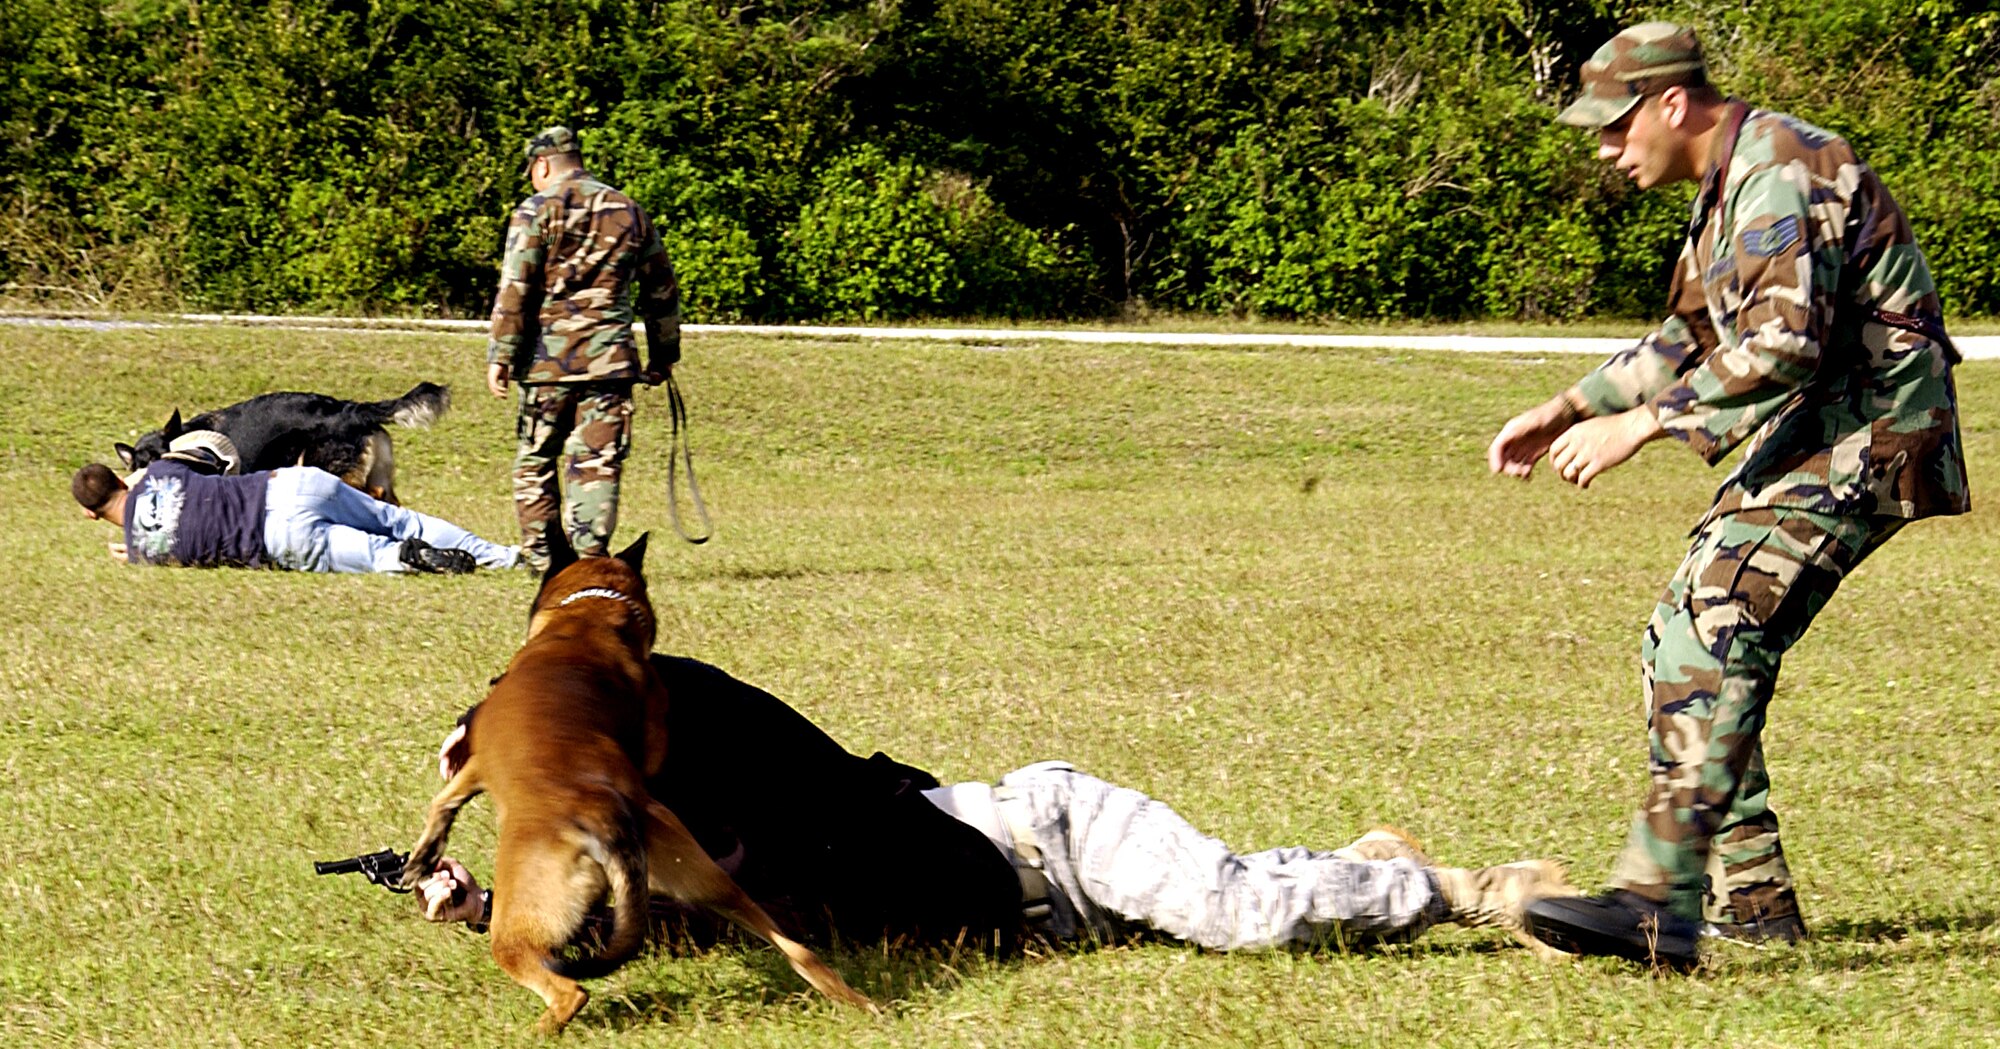 ANDERSEN AIR FORCE BASE, Guam -- Staff Sgts. Jose Meza and Casey Oullette, 36th Security Forces Squadron dog handlers, encourage their military working dogs "Big" Carlos and "Baby" Carlos to stop perpetrators Senior Airman Joel Congdon, a 36th SFS patrolman, and Staff Sgt. William Townsend, a 36th SFS dog handler, during a MWD competition here Feb. 2.  In the scenario, Team Shake and Bake were forced to respond when the two suspects became uncooperative during a high-risk traffic stop. Team Shake and Bake was one of five to compete in the competition hosted by 36th SFS. (U.S. Air Force photo by Airman 1st Class Carissa Wolff)